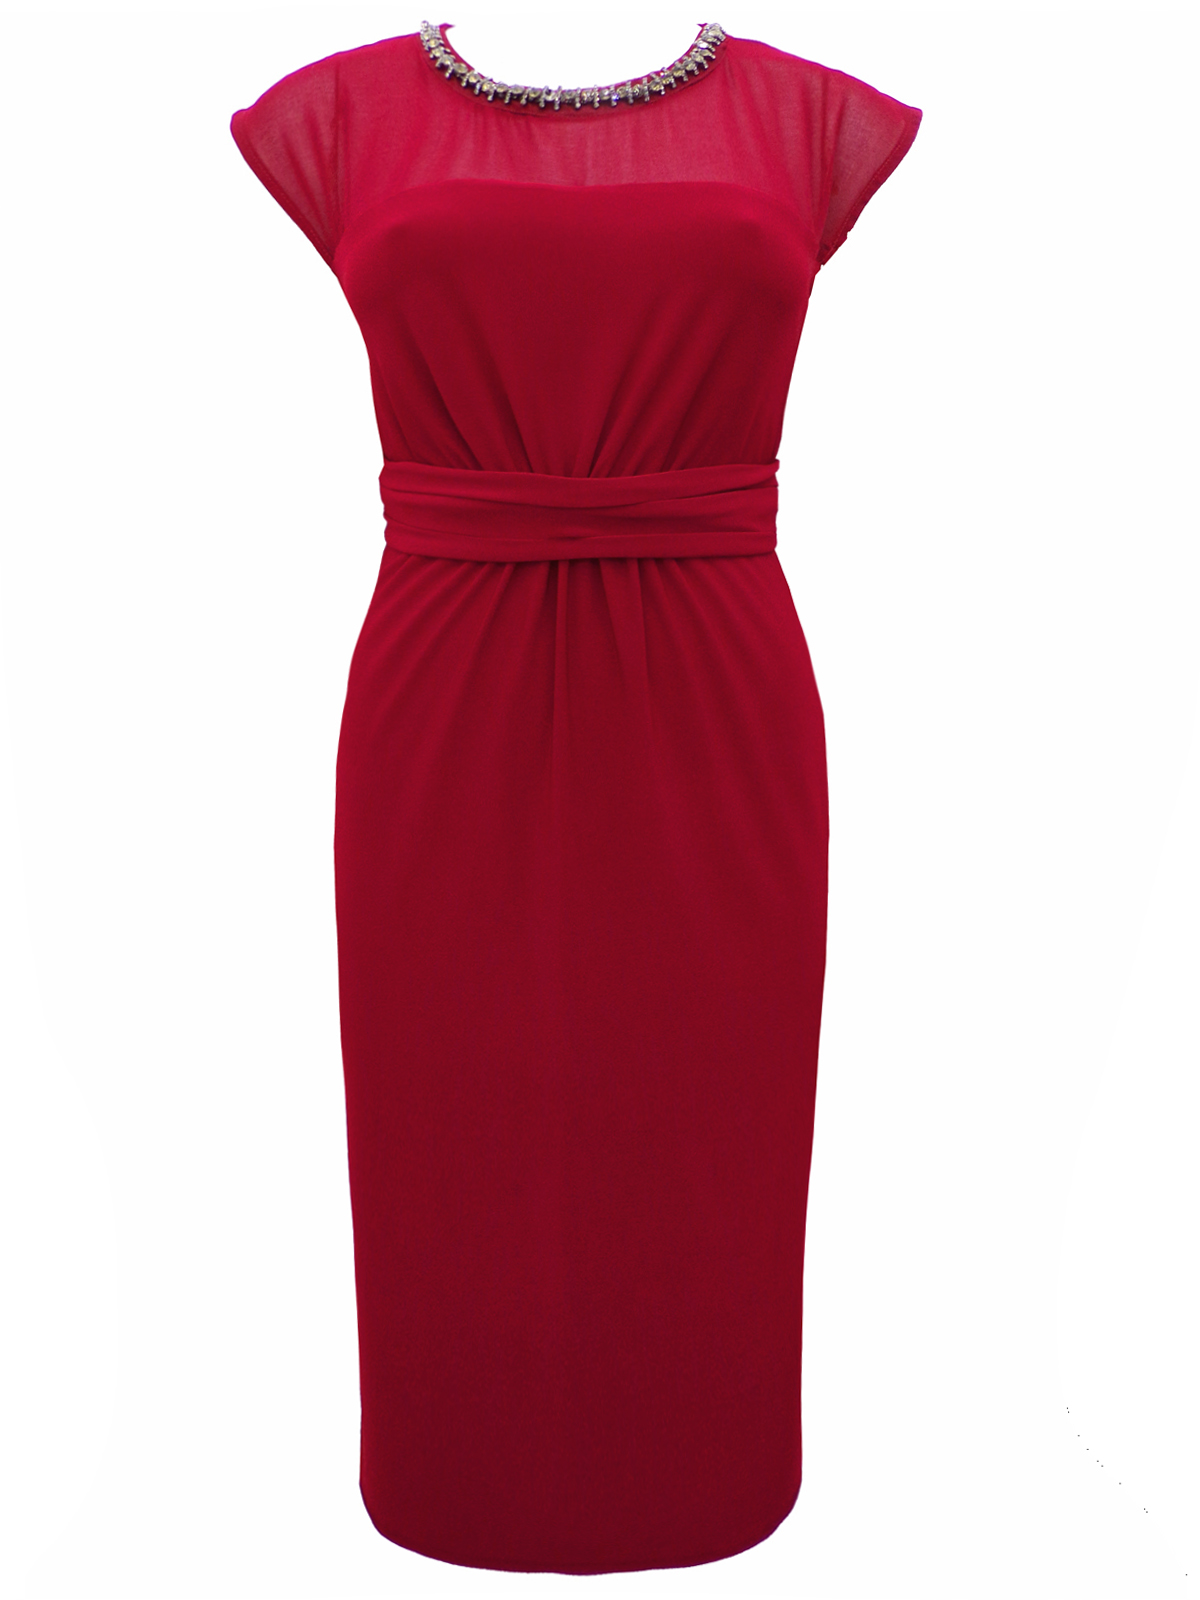 M0nsoon RED Serena Sleeveless Embellished Dress - Size 8 to 18